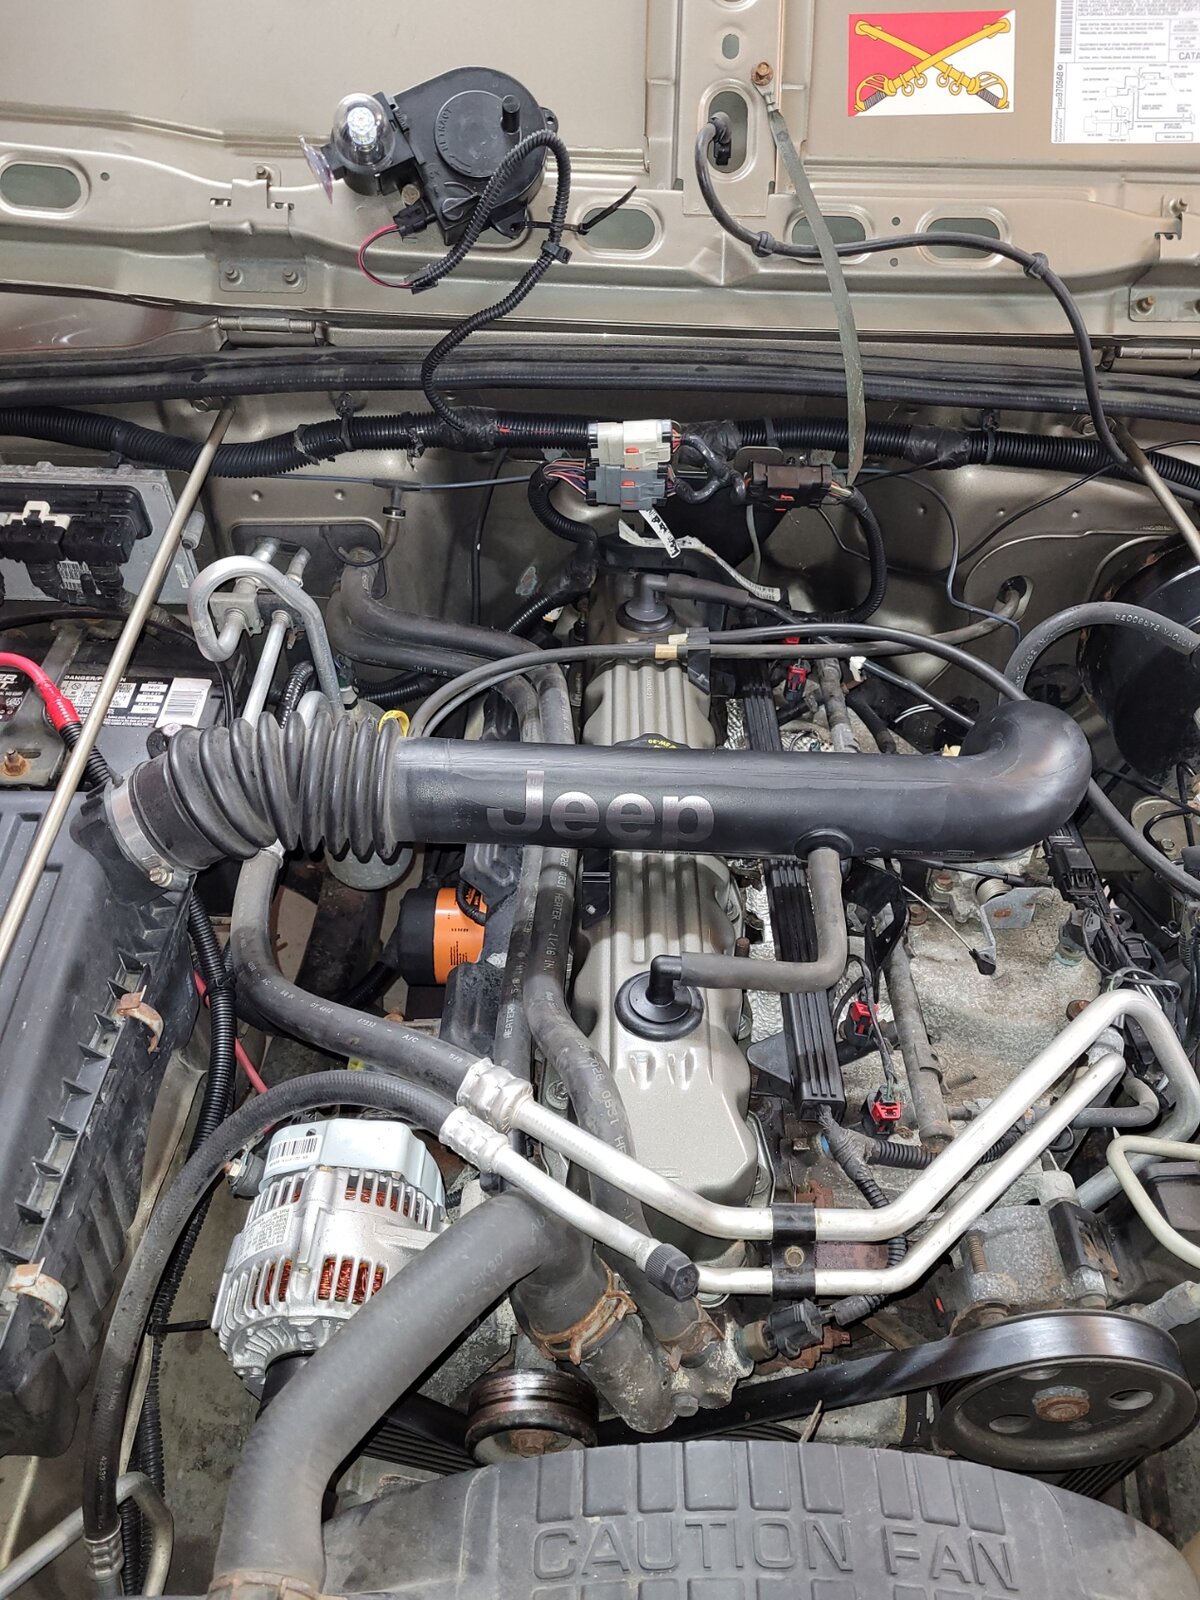 valve cover painted.jpg